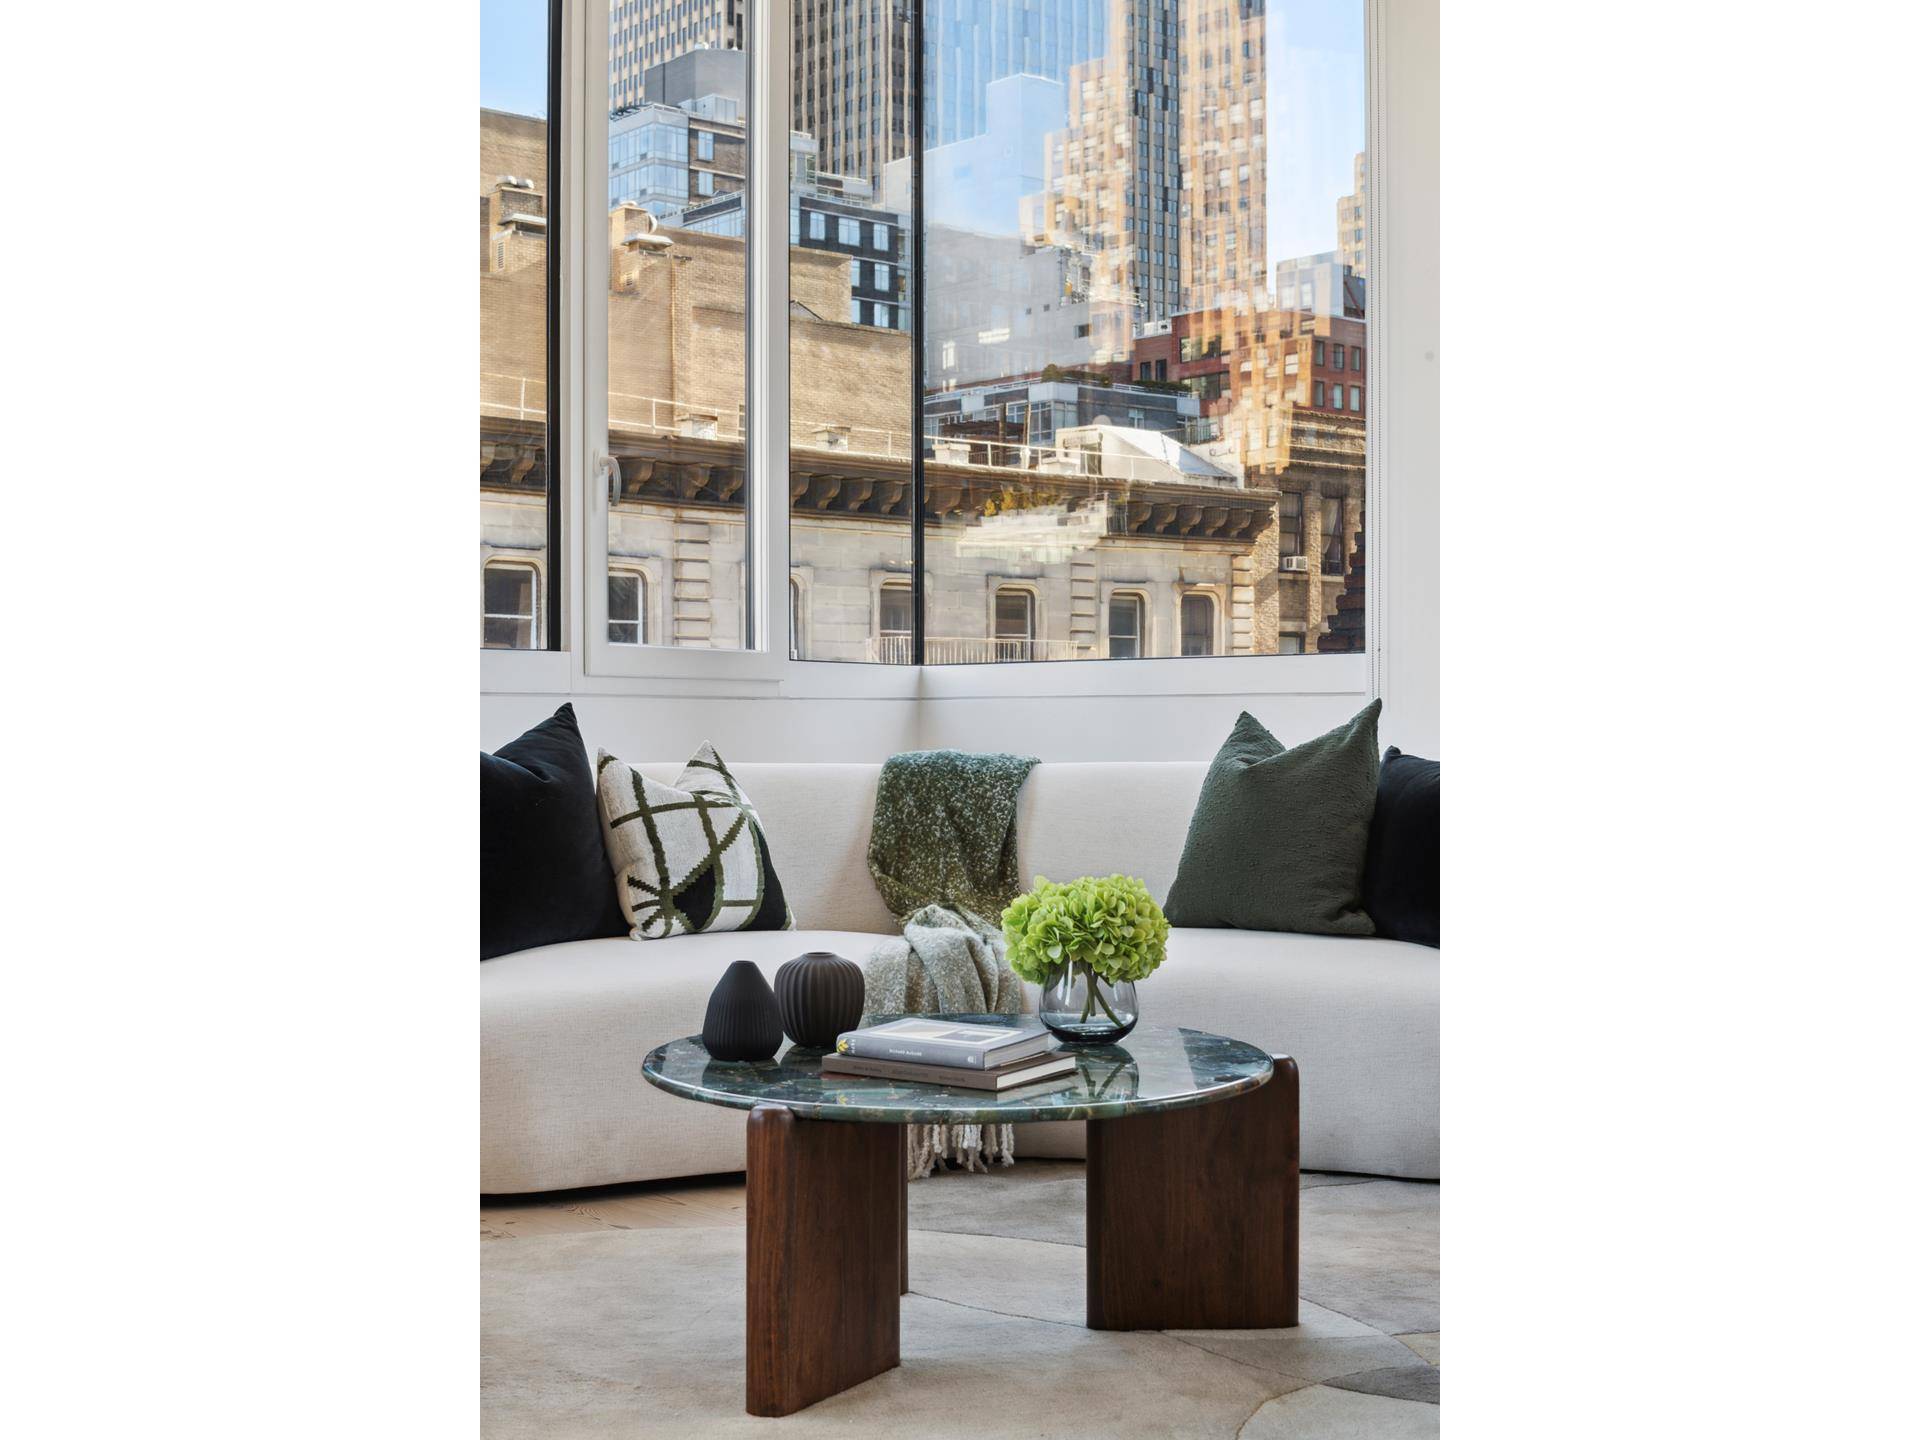 Introducing the Penthouse at 100 Franklin Street.